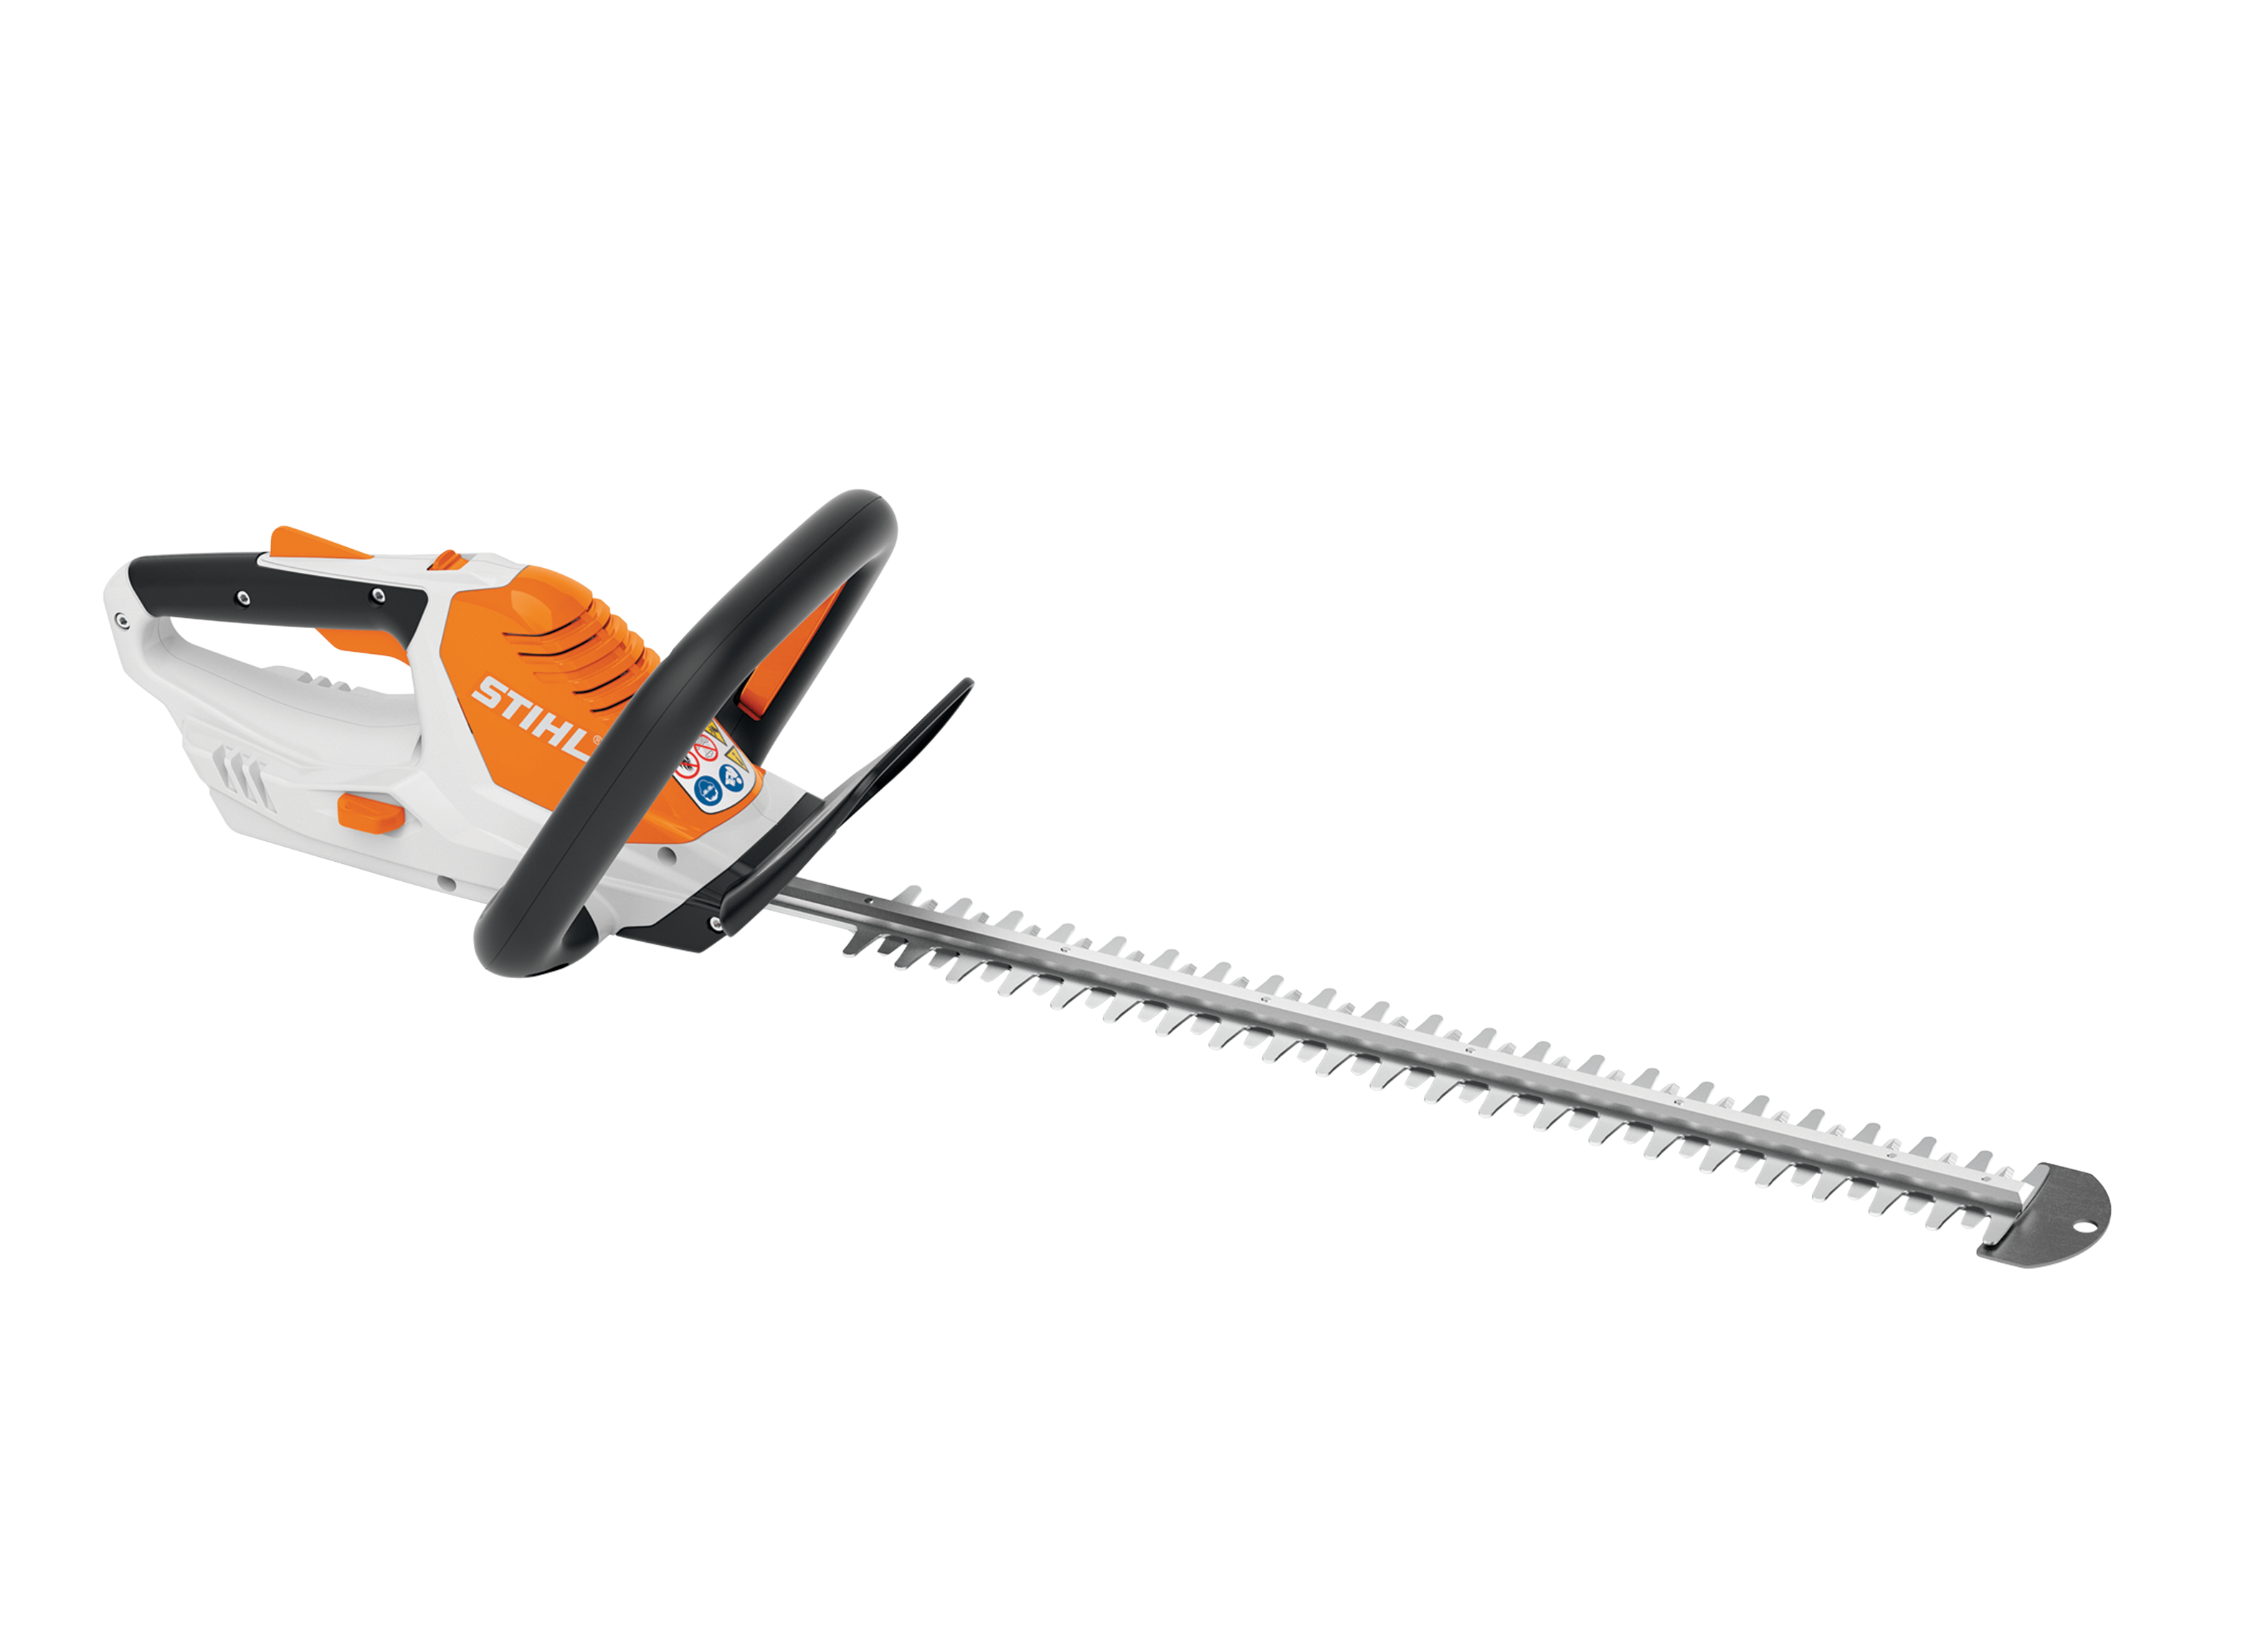 https://crdms.images.consumerreports.org/prod/products/cr/models/405490-hedge-trimmers-stihl-hsa-45-10026022.png